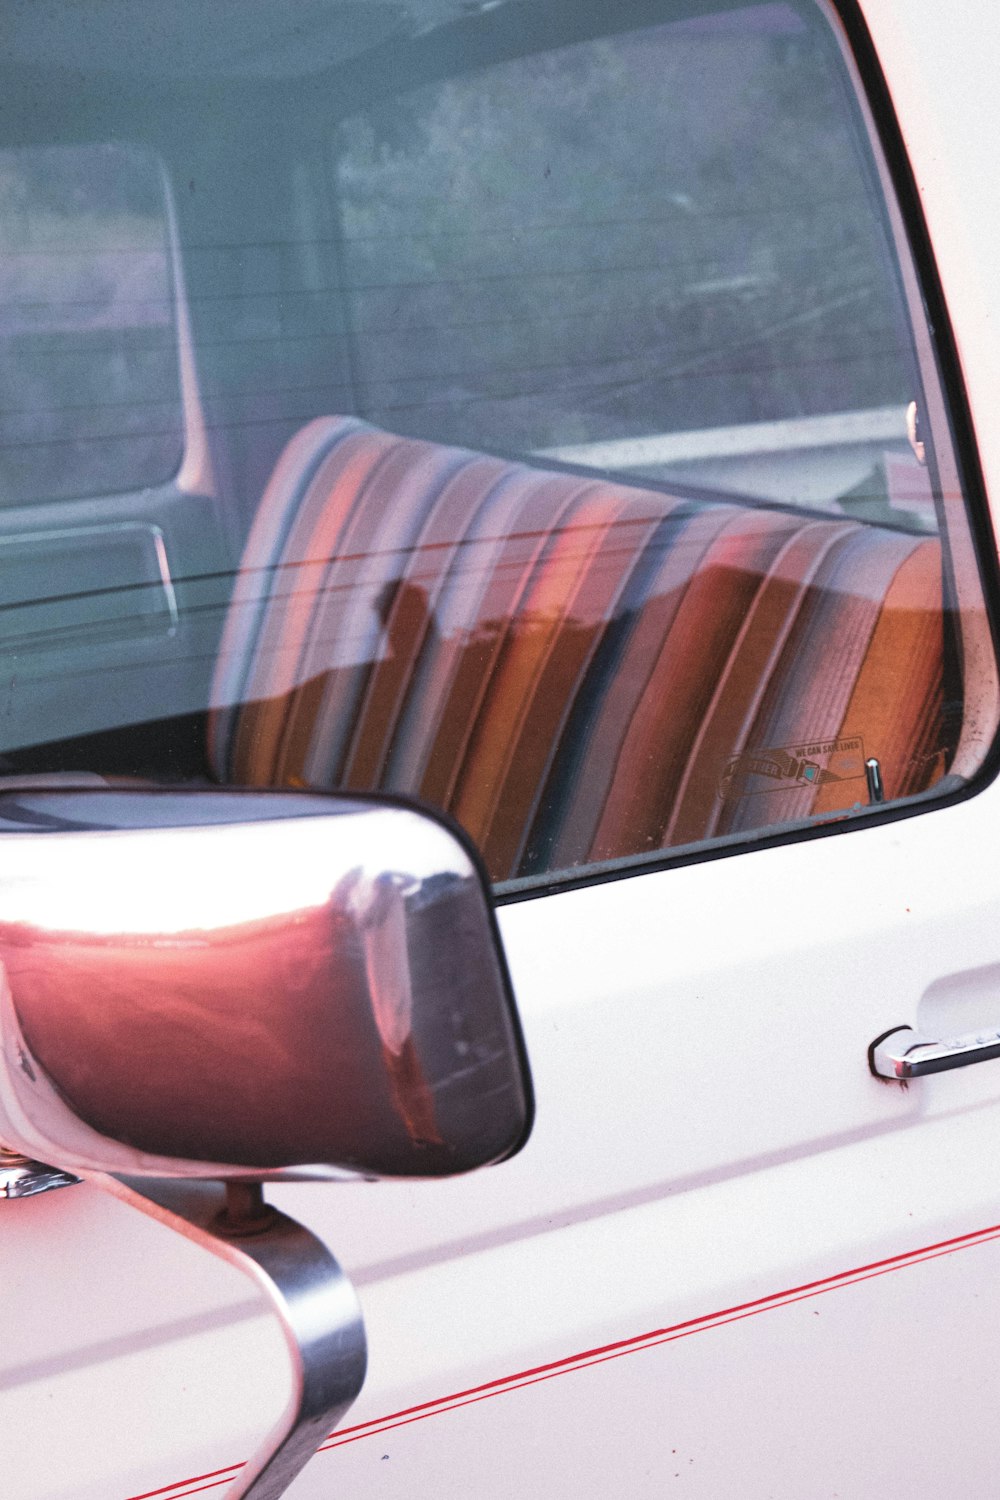 white car door with brown and white striped seat